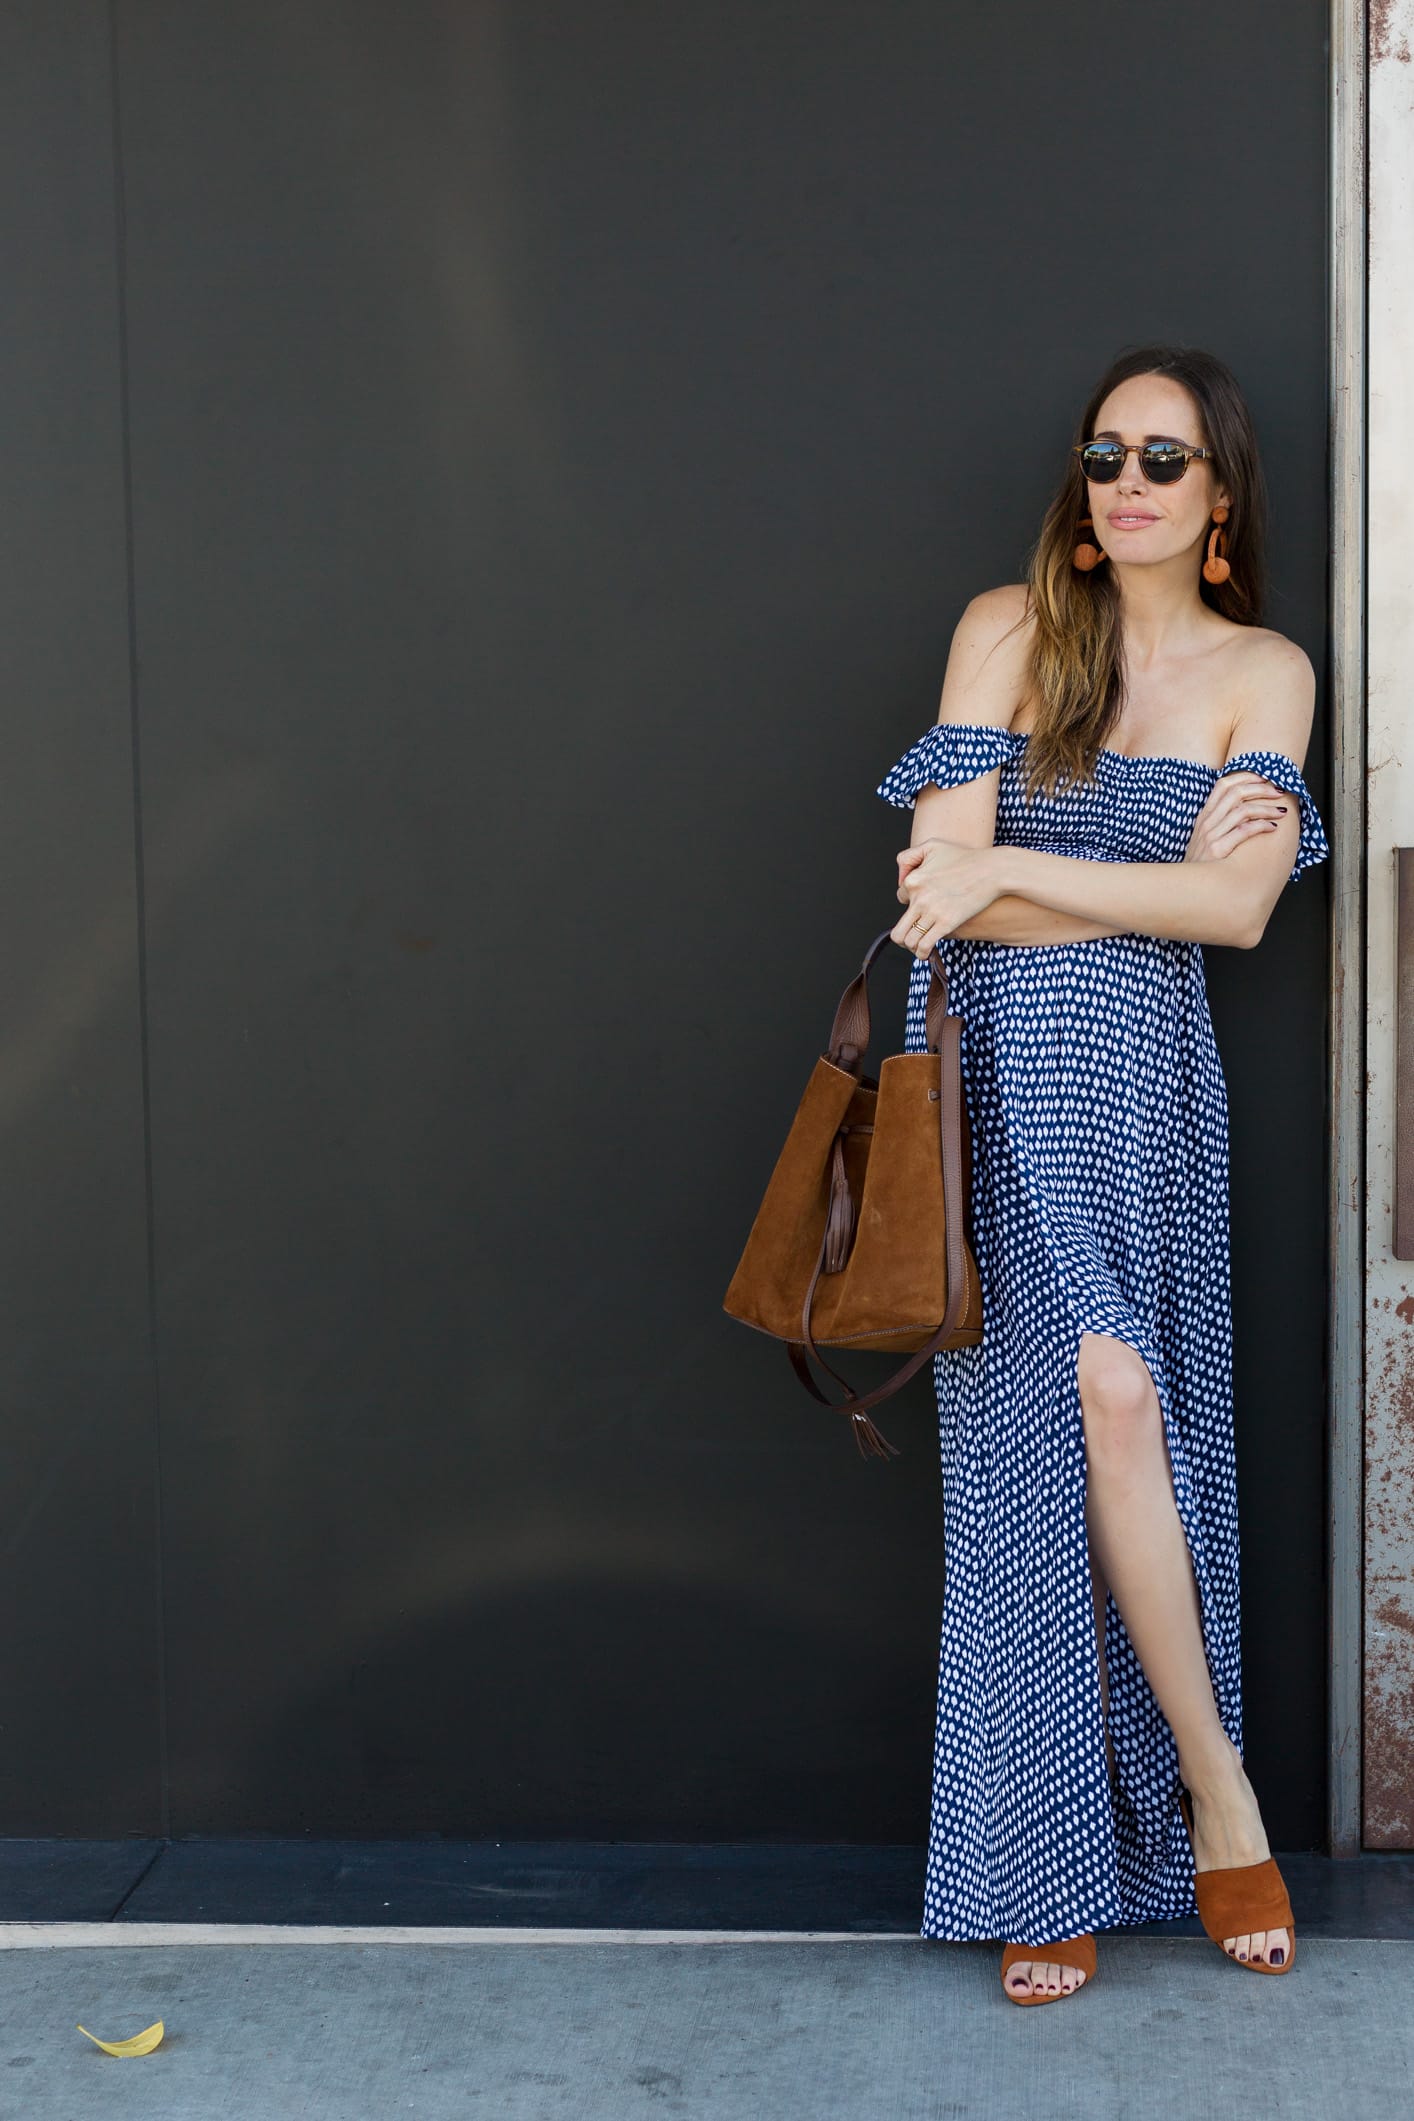 Louise Roe Wearing Blue Maxi Dress and Tan Accessories Transitional Fall Outfit